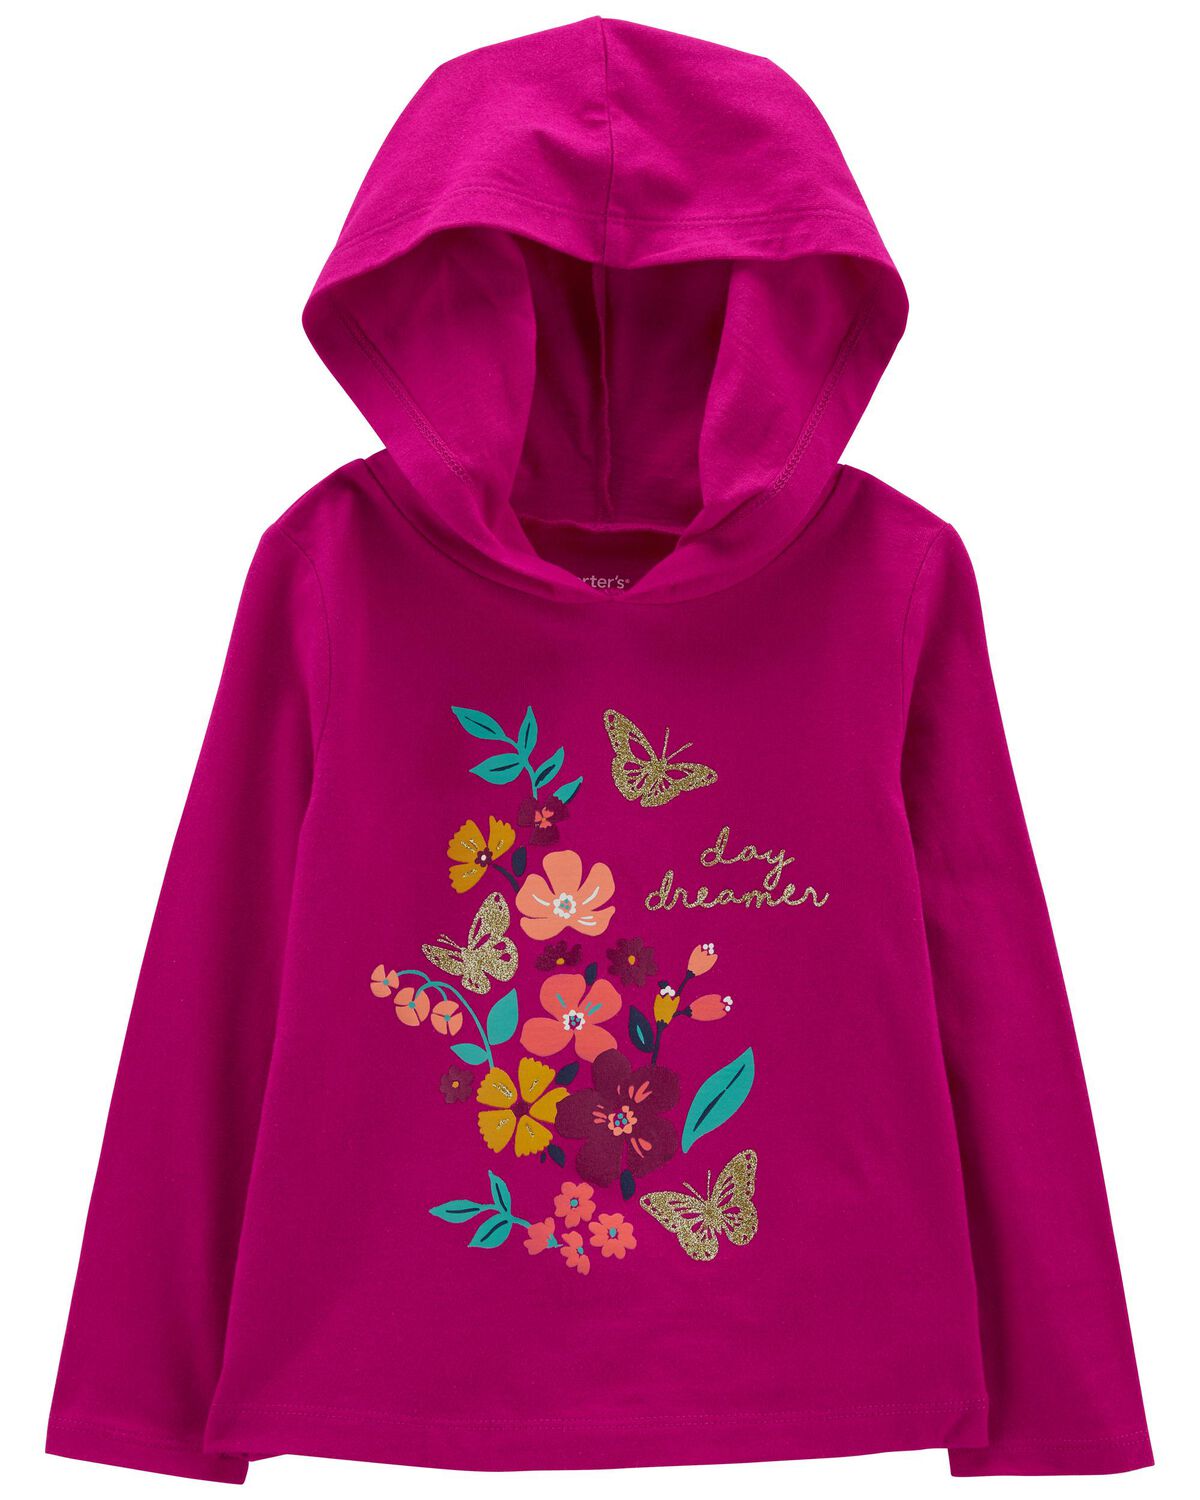 Pink Toddler Day Dreamer Jersey Hoodie | carters.com